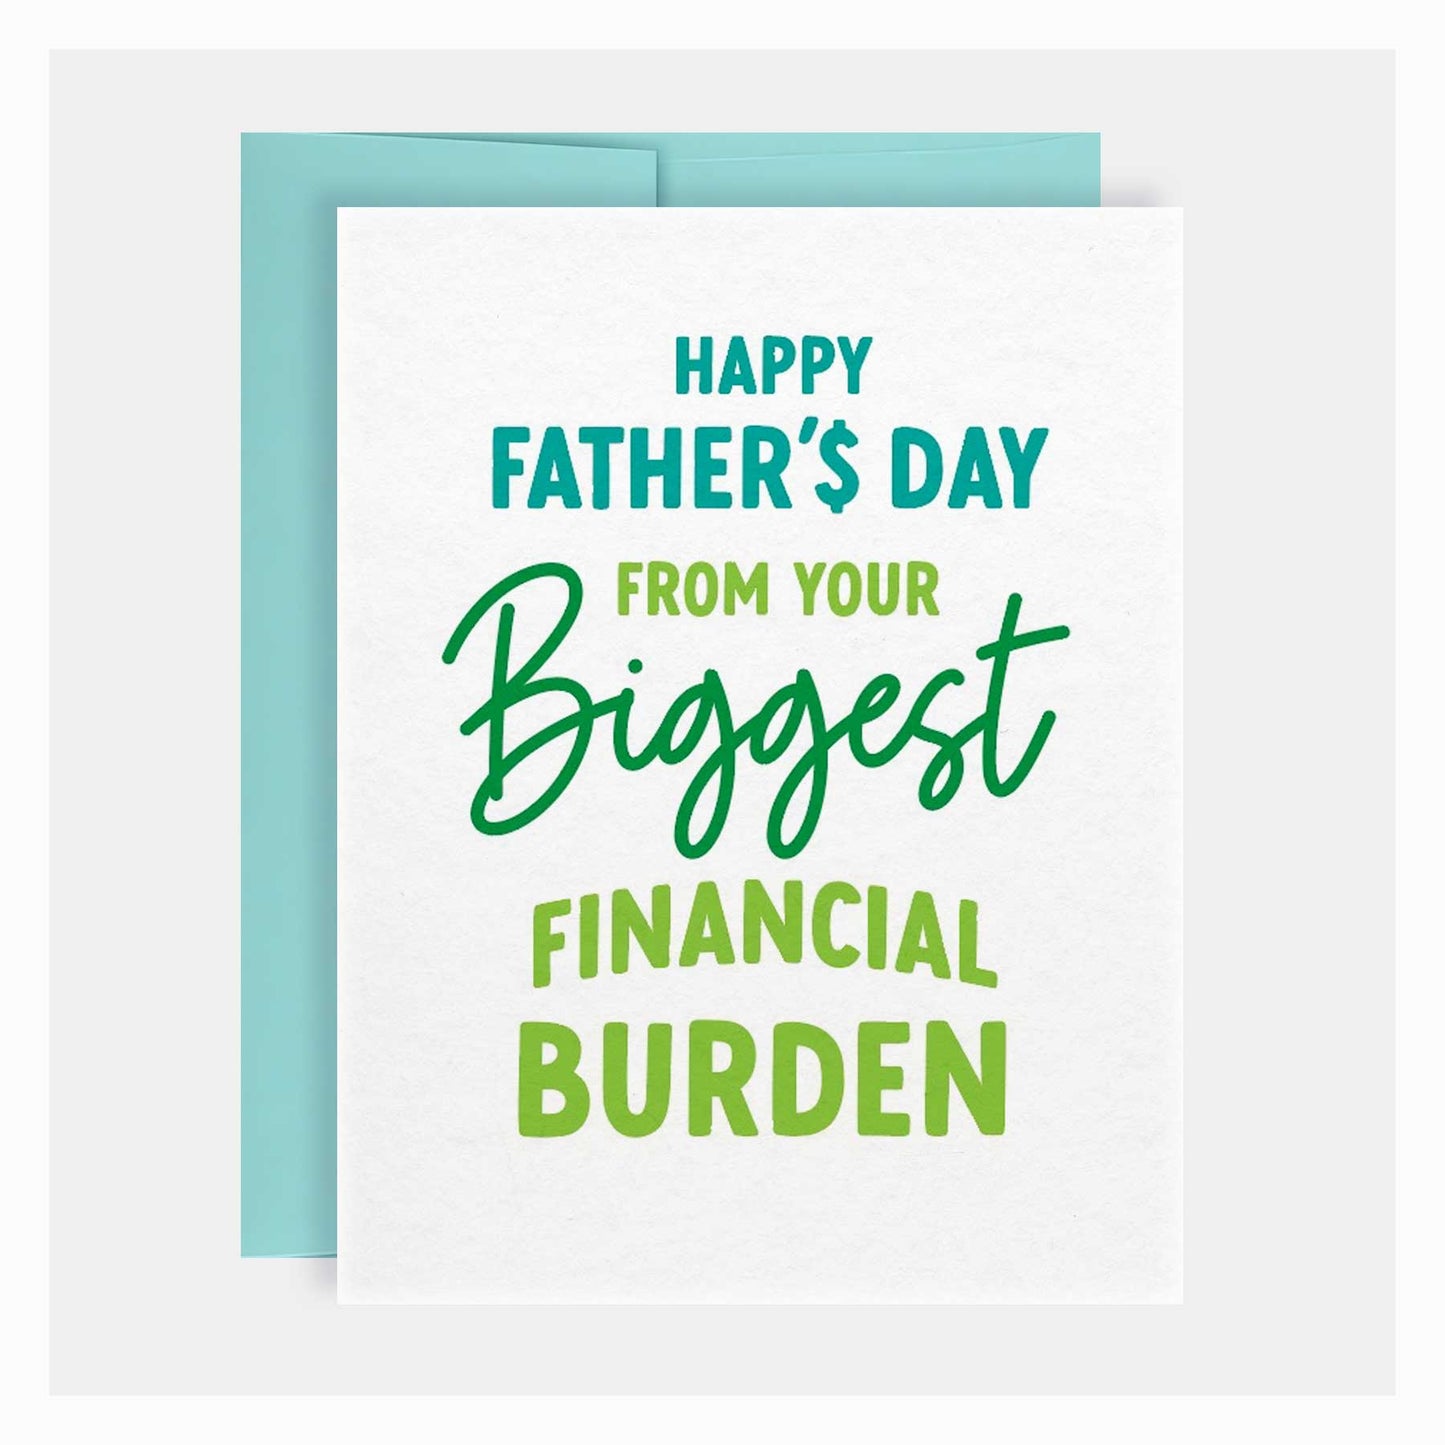 Financial Burden | Father's Day Greeting Card